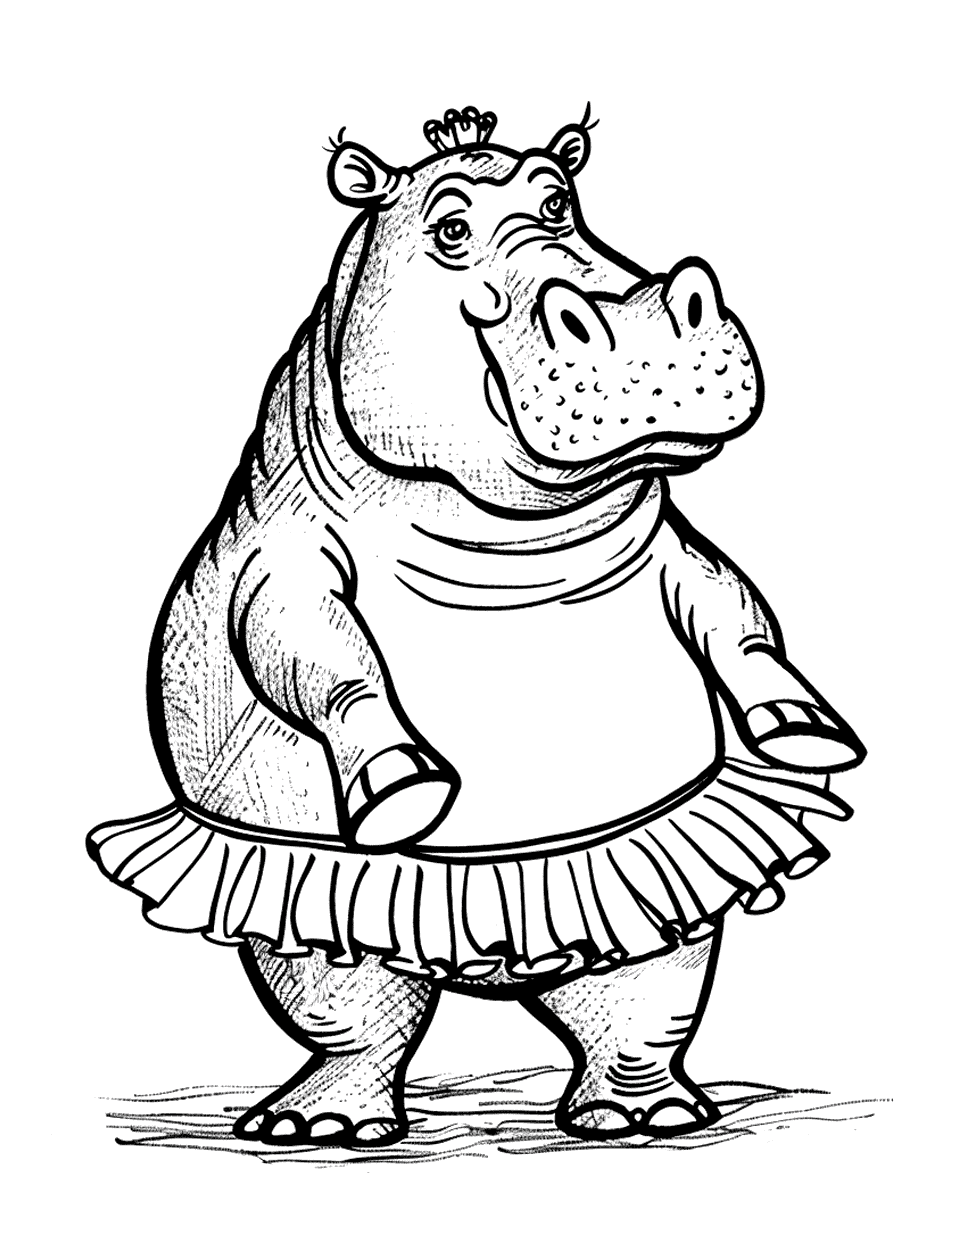 Hippo Ballet Performance Coloring Page - Hippos gracefully dancing ballet on stage, wearing tutus.